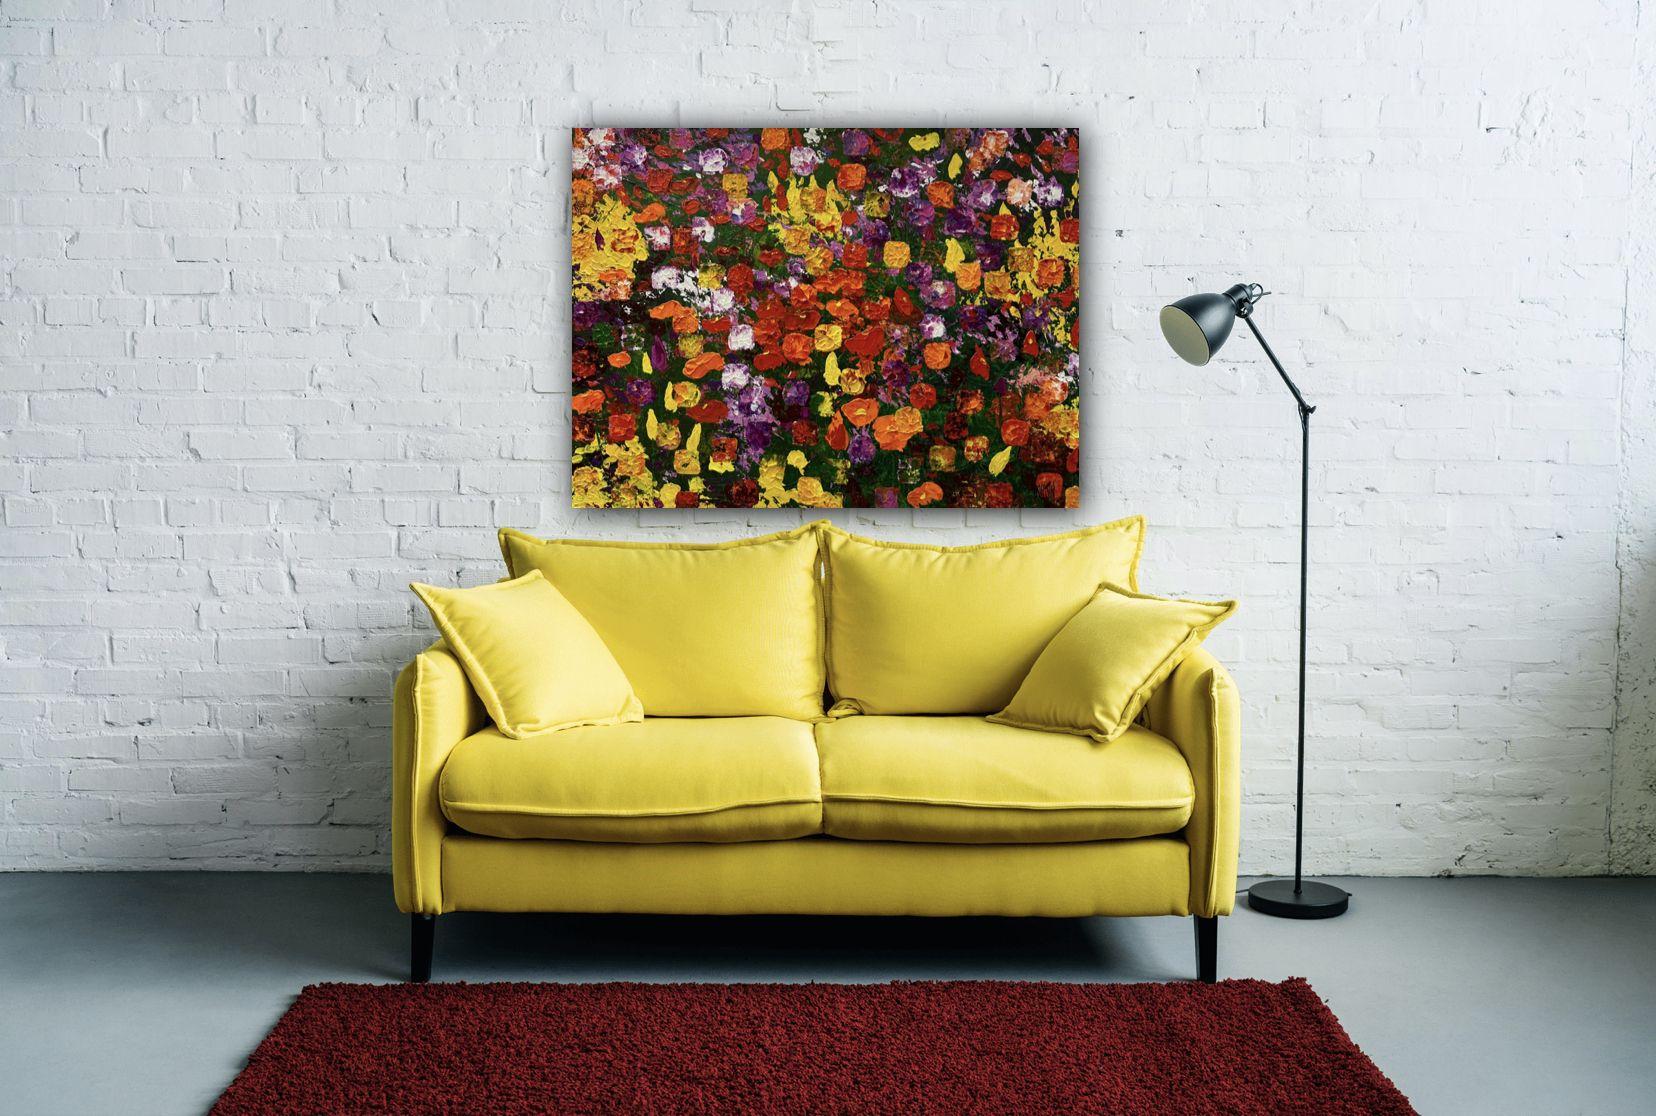 This vibrant painting is based on the gardens in Paris that are an inspiration for many of the artist's work. Highly textured with layers of paint that represent in abstract realism floral gardens. Size is 30â€